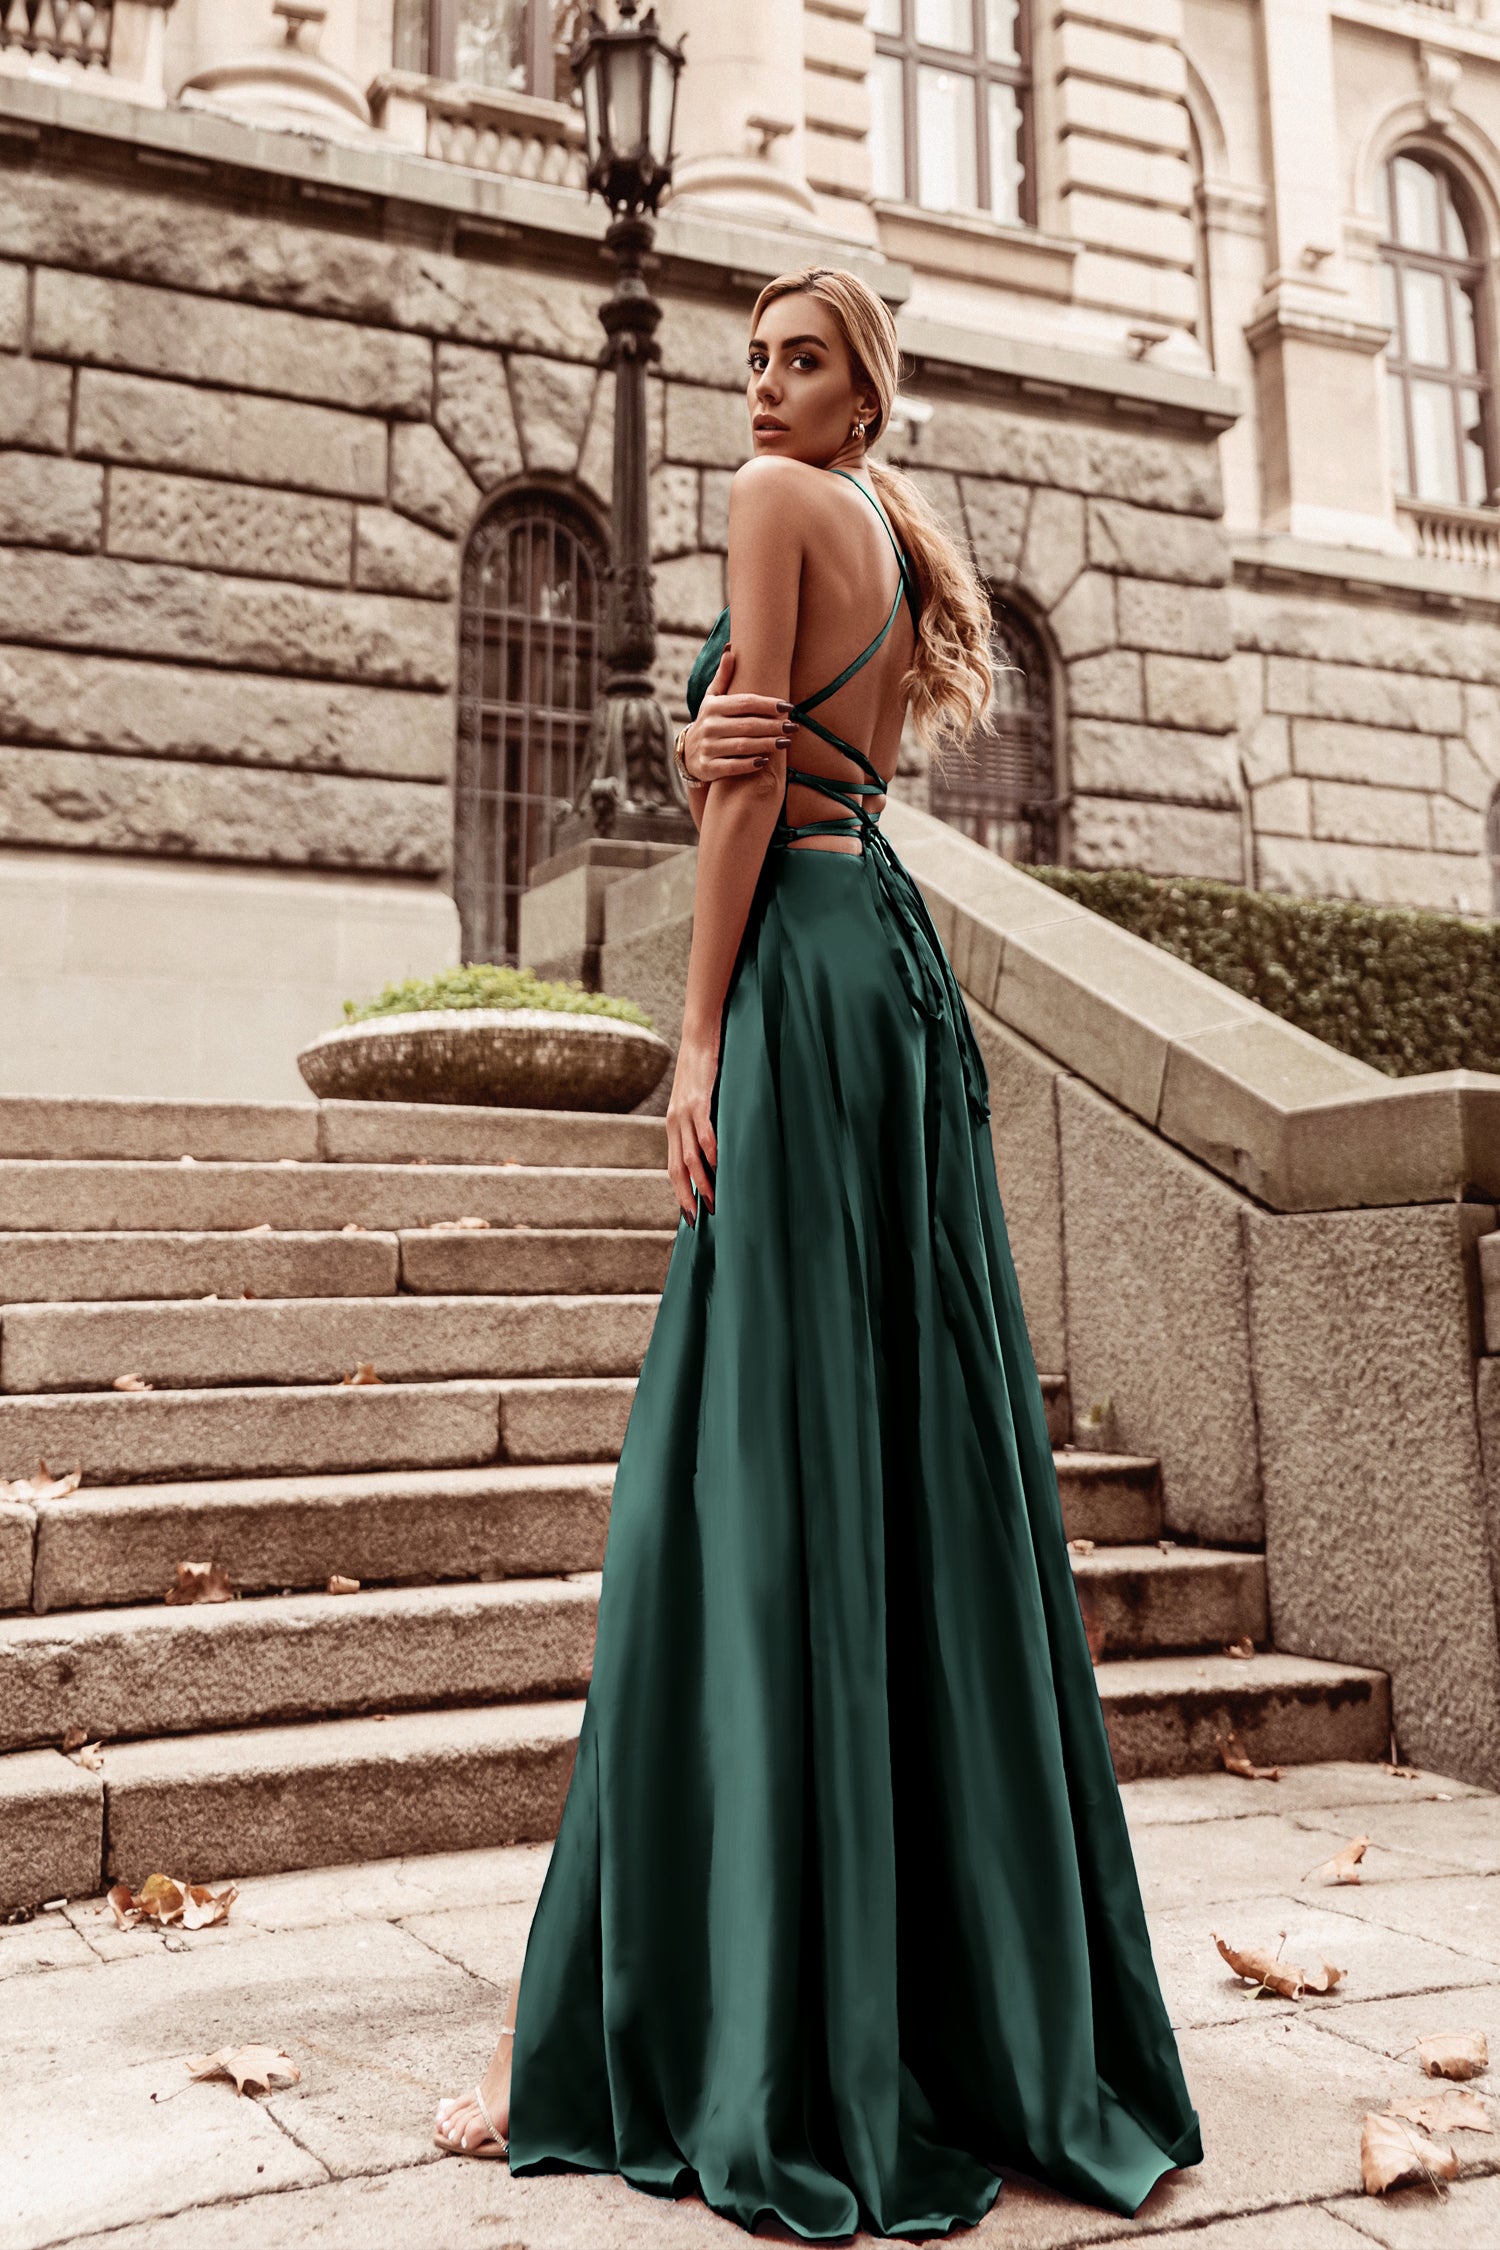 Tina Holly Couture Designer TW004 Emerald Lace Up Back Silky Satin Formal Gown